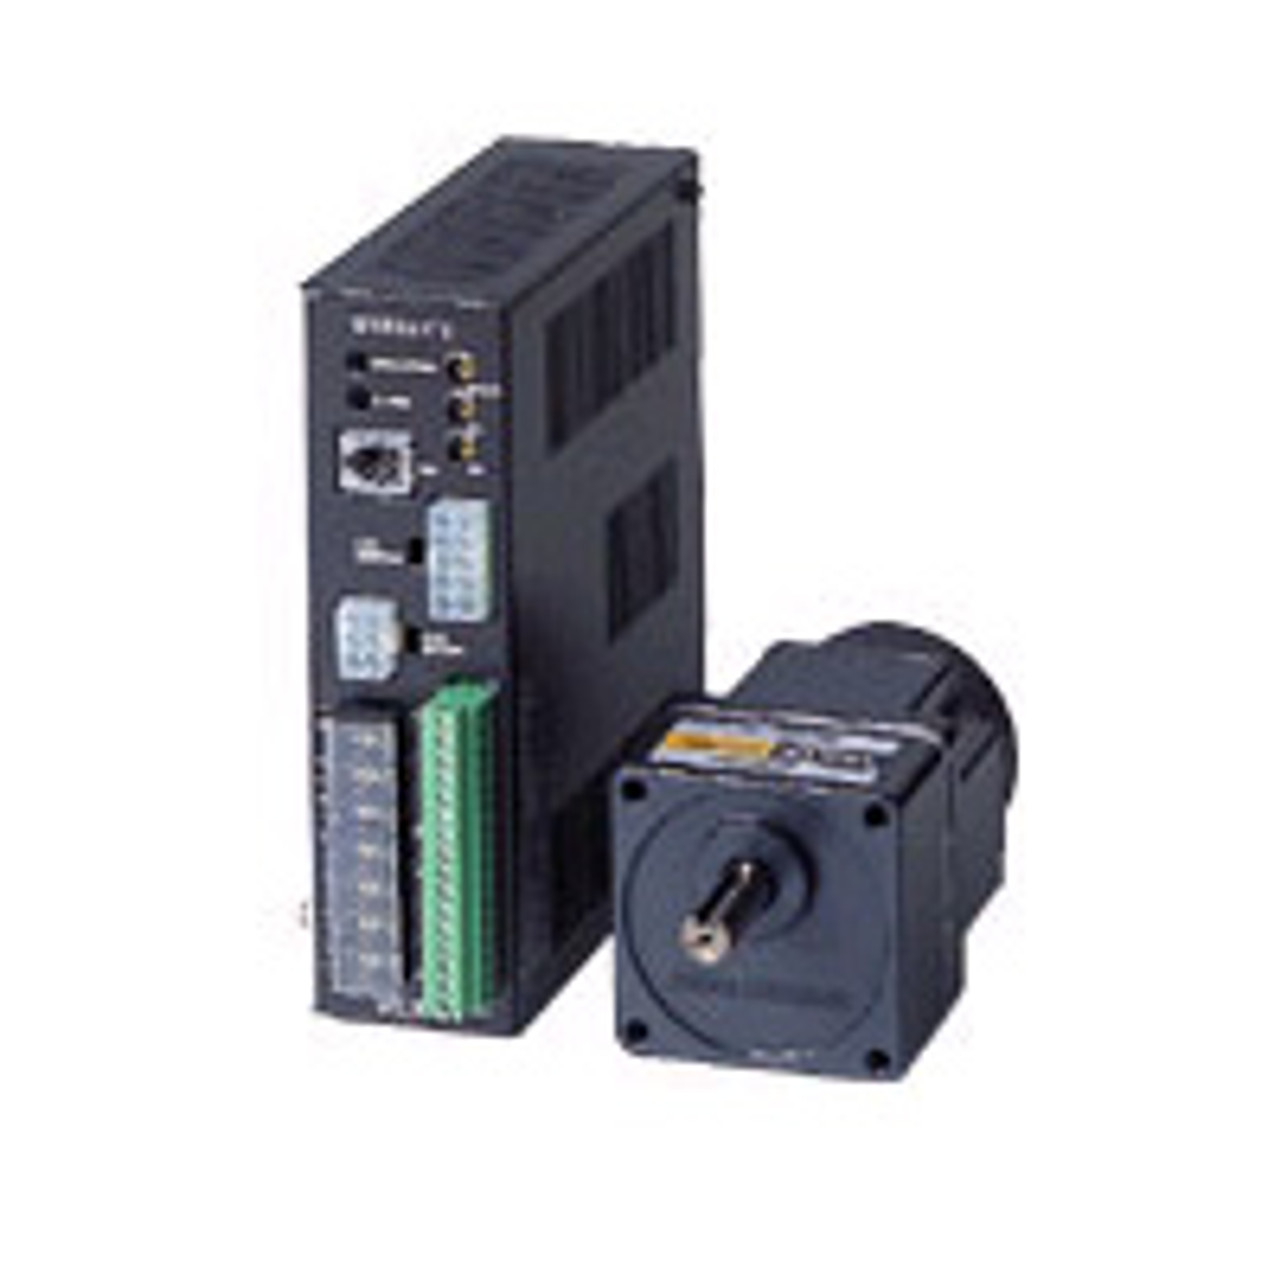 BX230A-15 - Product Image